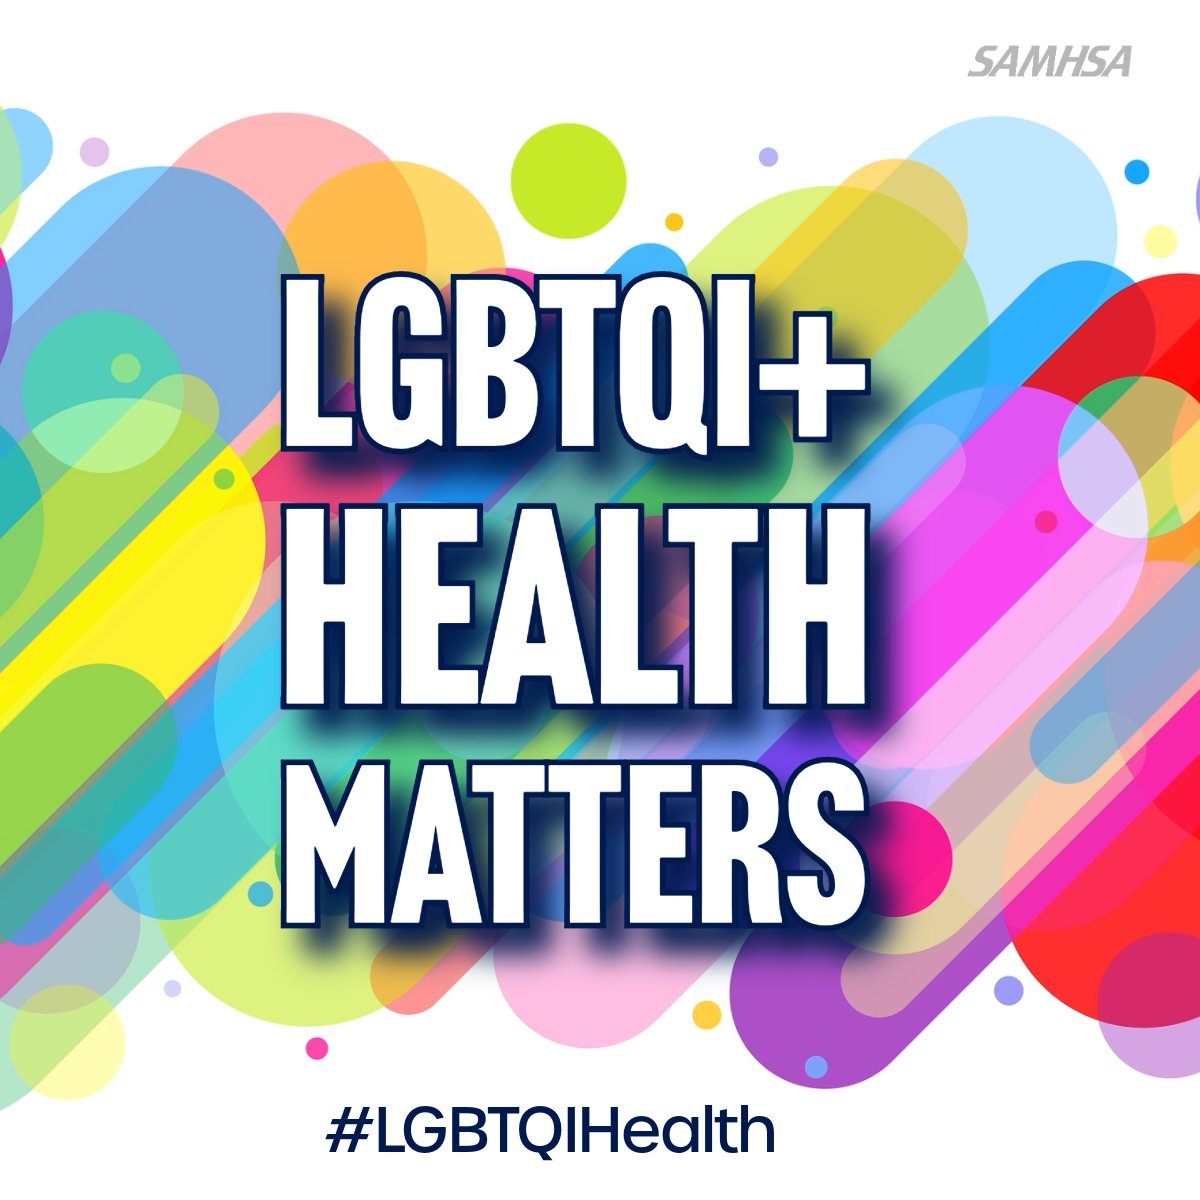 This week is #LGBTQIHealthAwarenessWeek—a time to bring attention to health disparities that affect the #LGBTQI+ community. Everyone deserves comprehensive healthcare, free from discrimination. Learn more about finding LGBTQI+ inclusive providers: samhsa.gov/behavioral-hea…